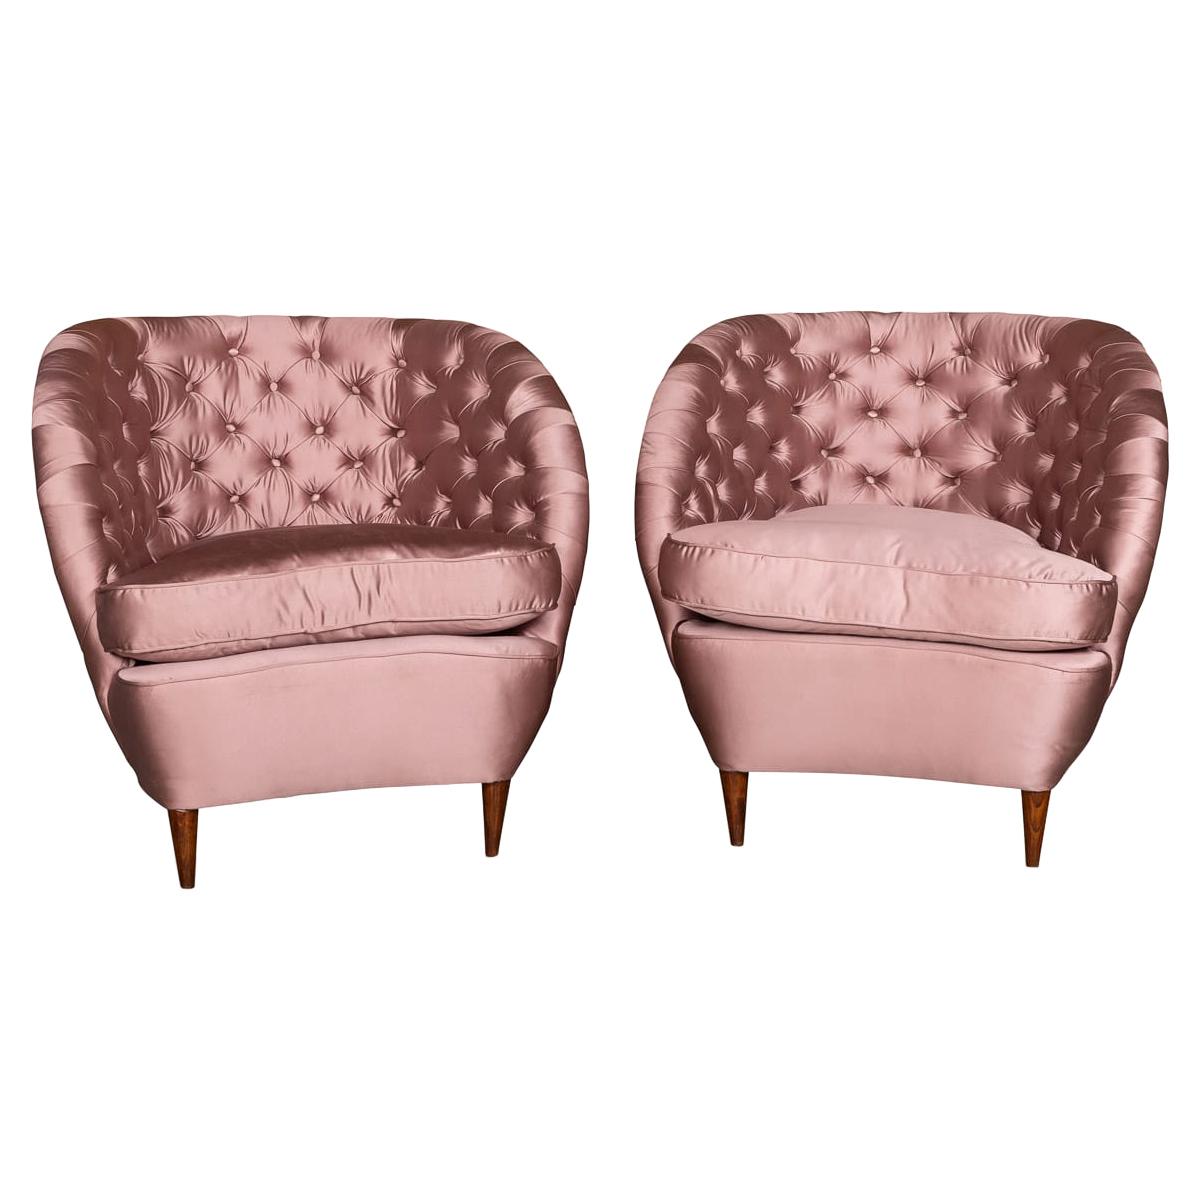 20th Century Pair of Boudoir Tub Chairs, circa 1930 For Sale